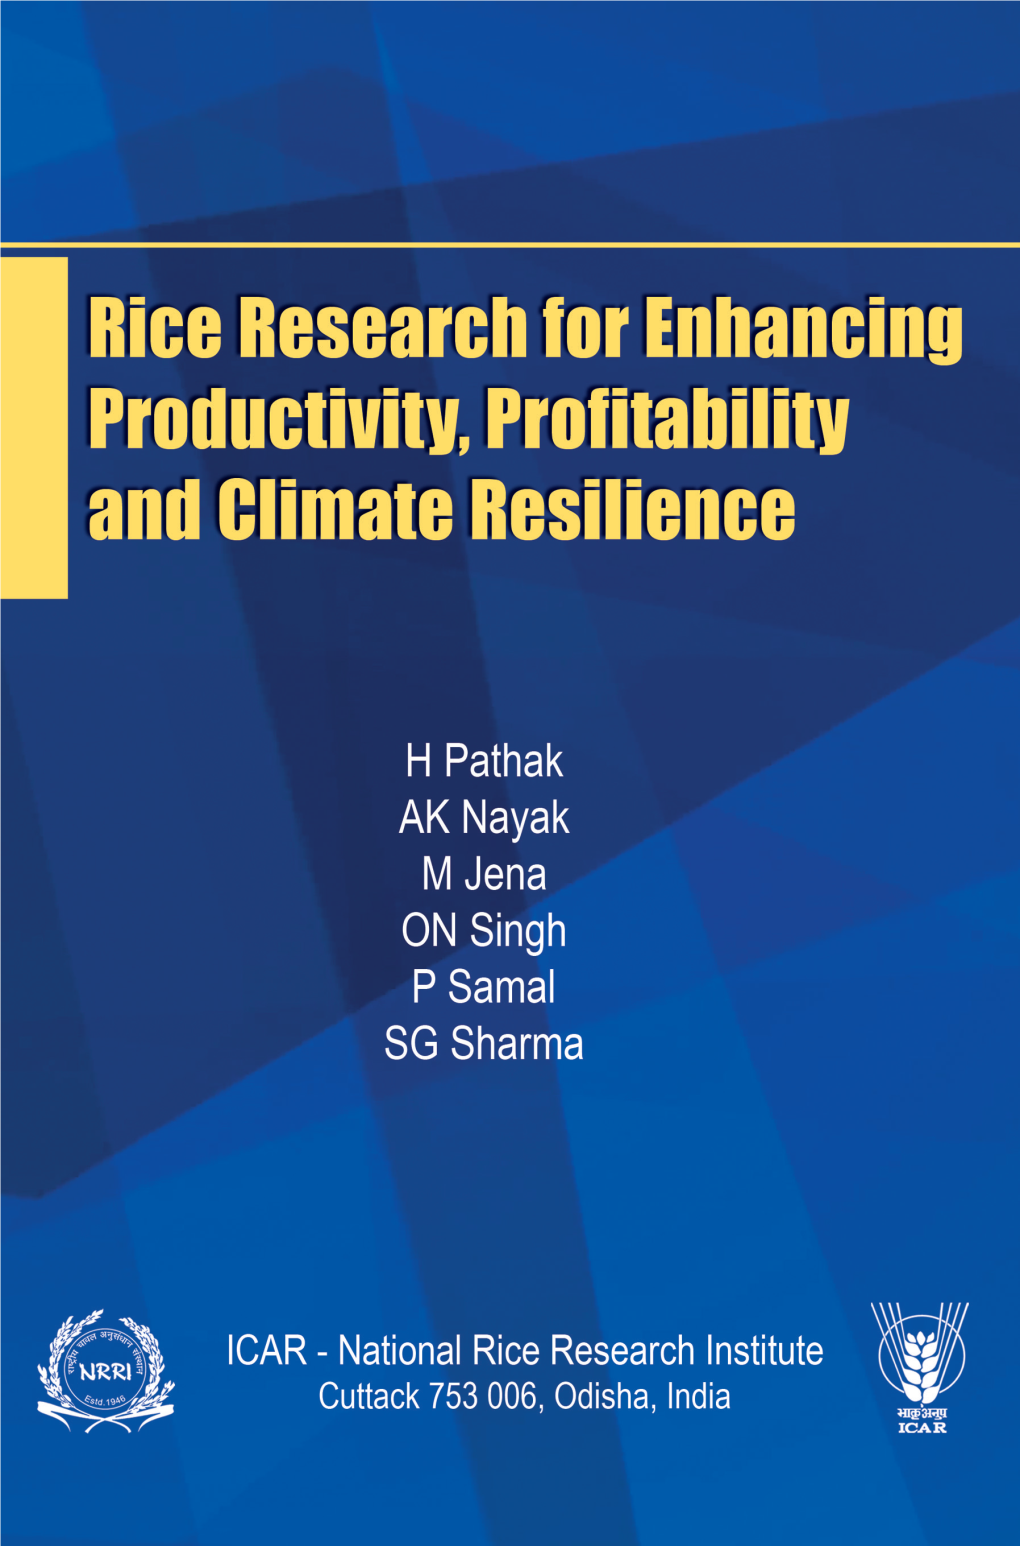 Rice Research for Enhancing Productivity, Profitability and Climate Resilience